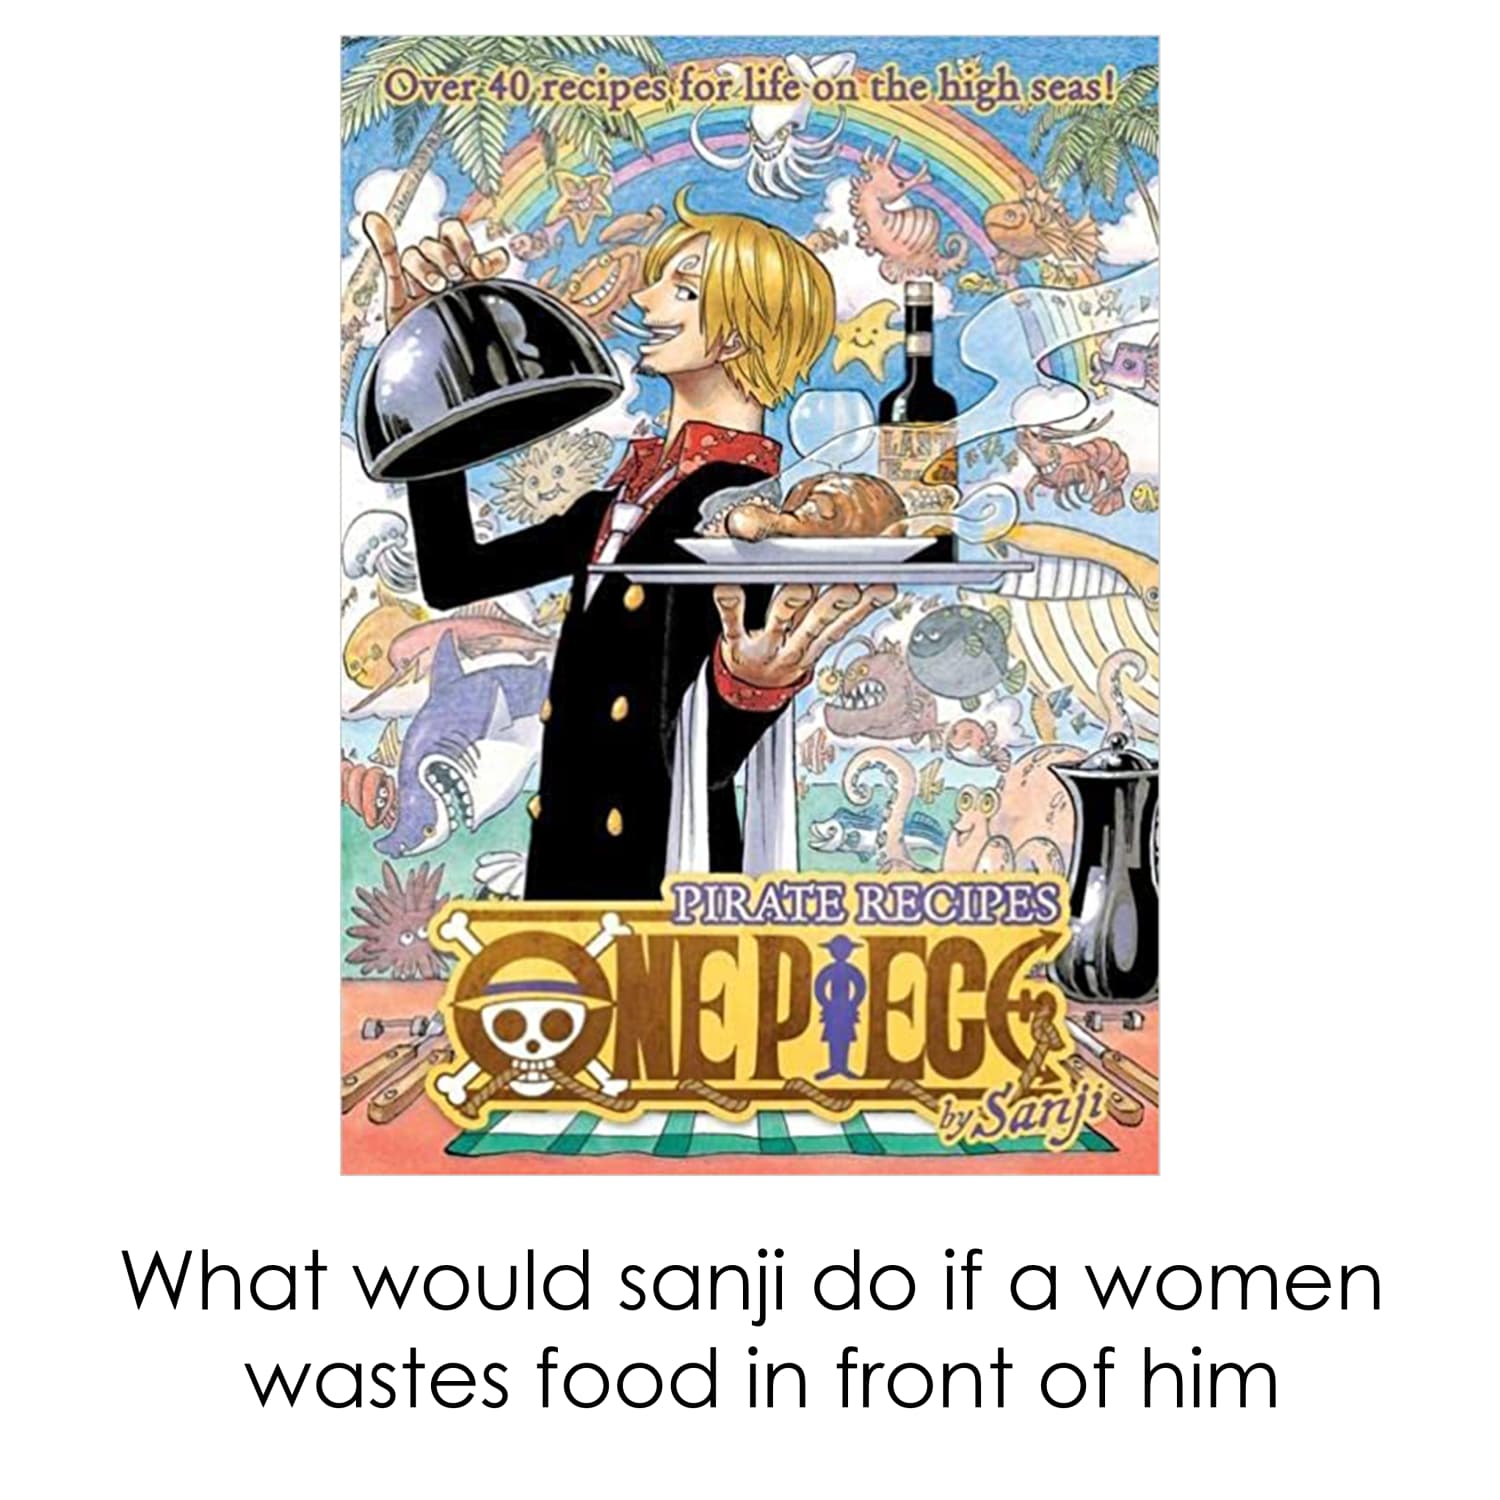 What would Sanji do if a woman wastes food in front of him?